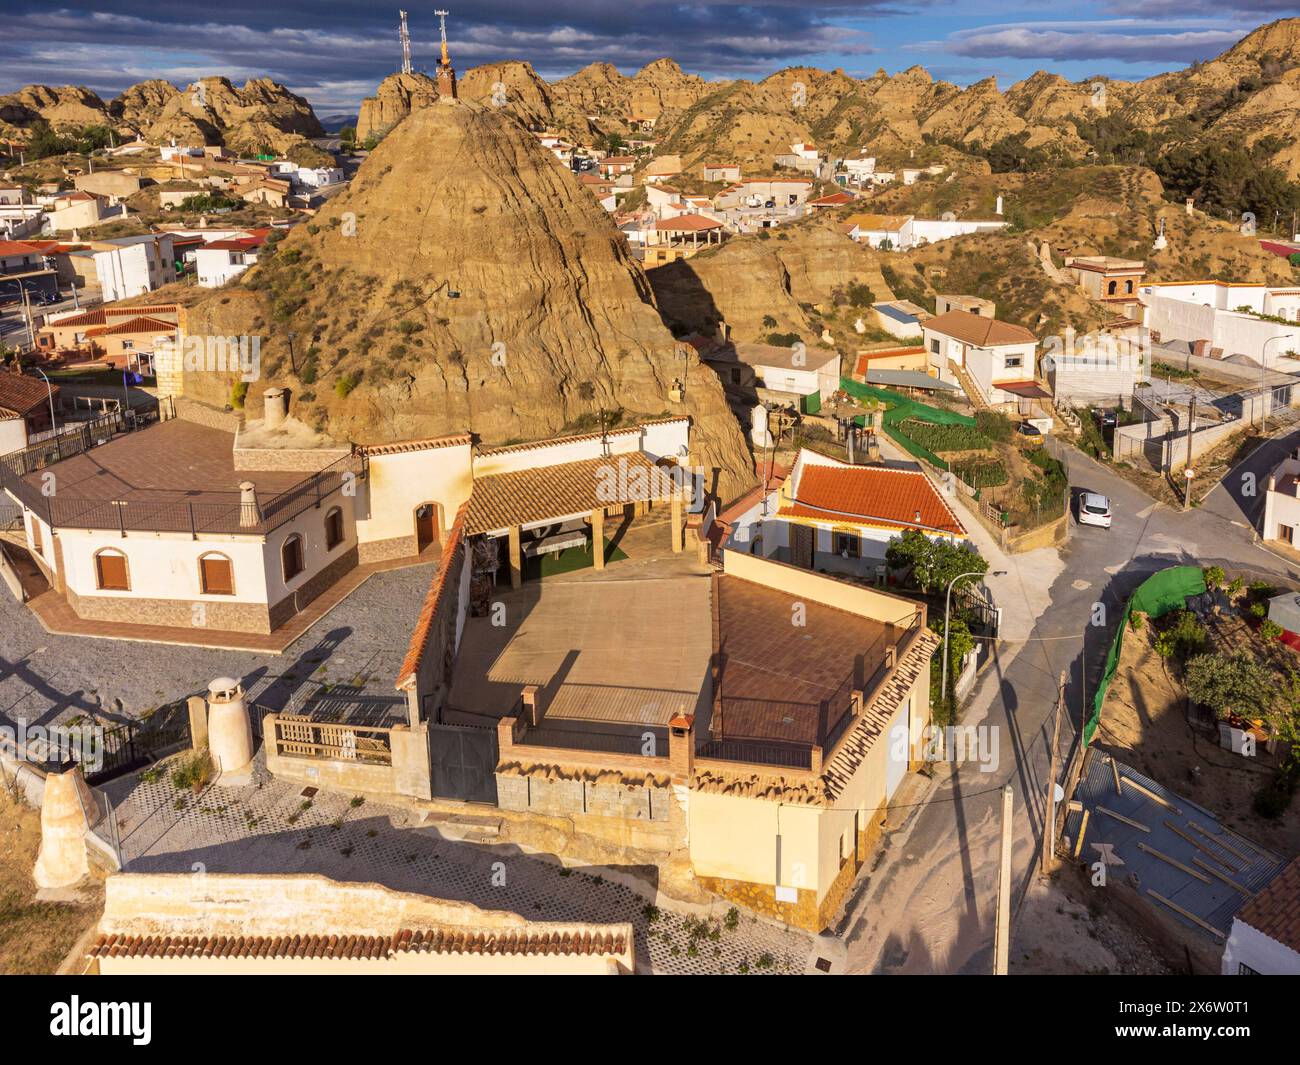 cave houses in the town of Purullena, Guadix region, Granada Geopark, UNESCO World Geopark, Betic Mountain Range, Andalusia, Spain. Stock Photo